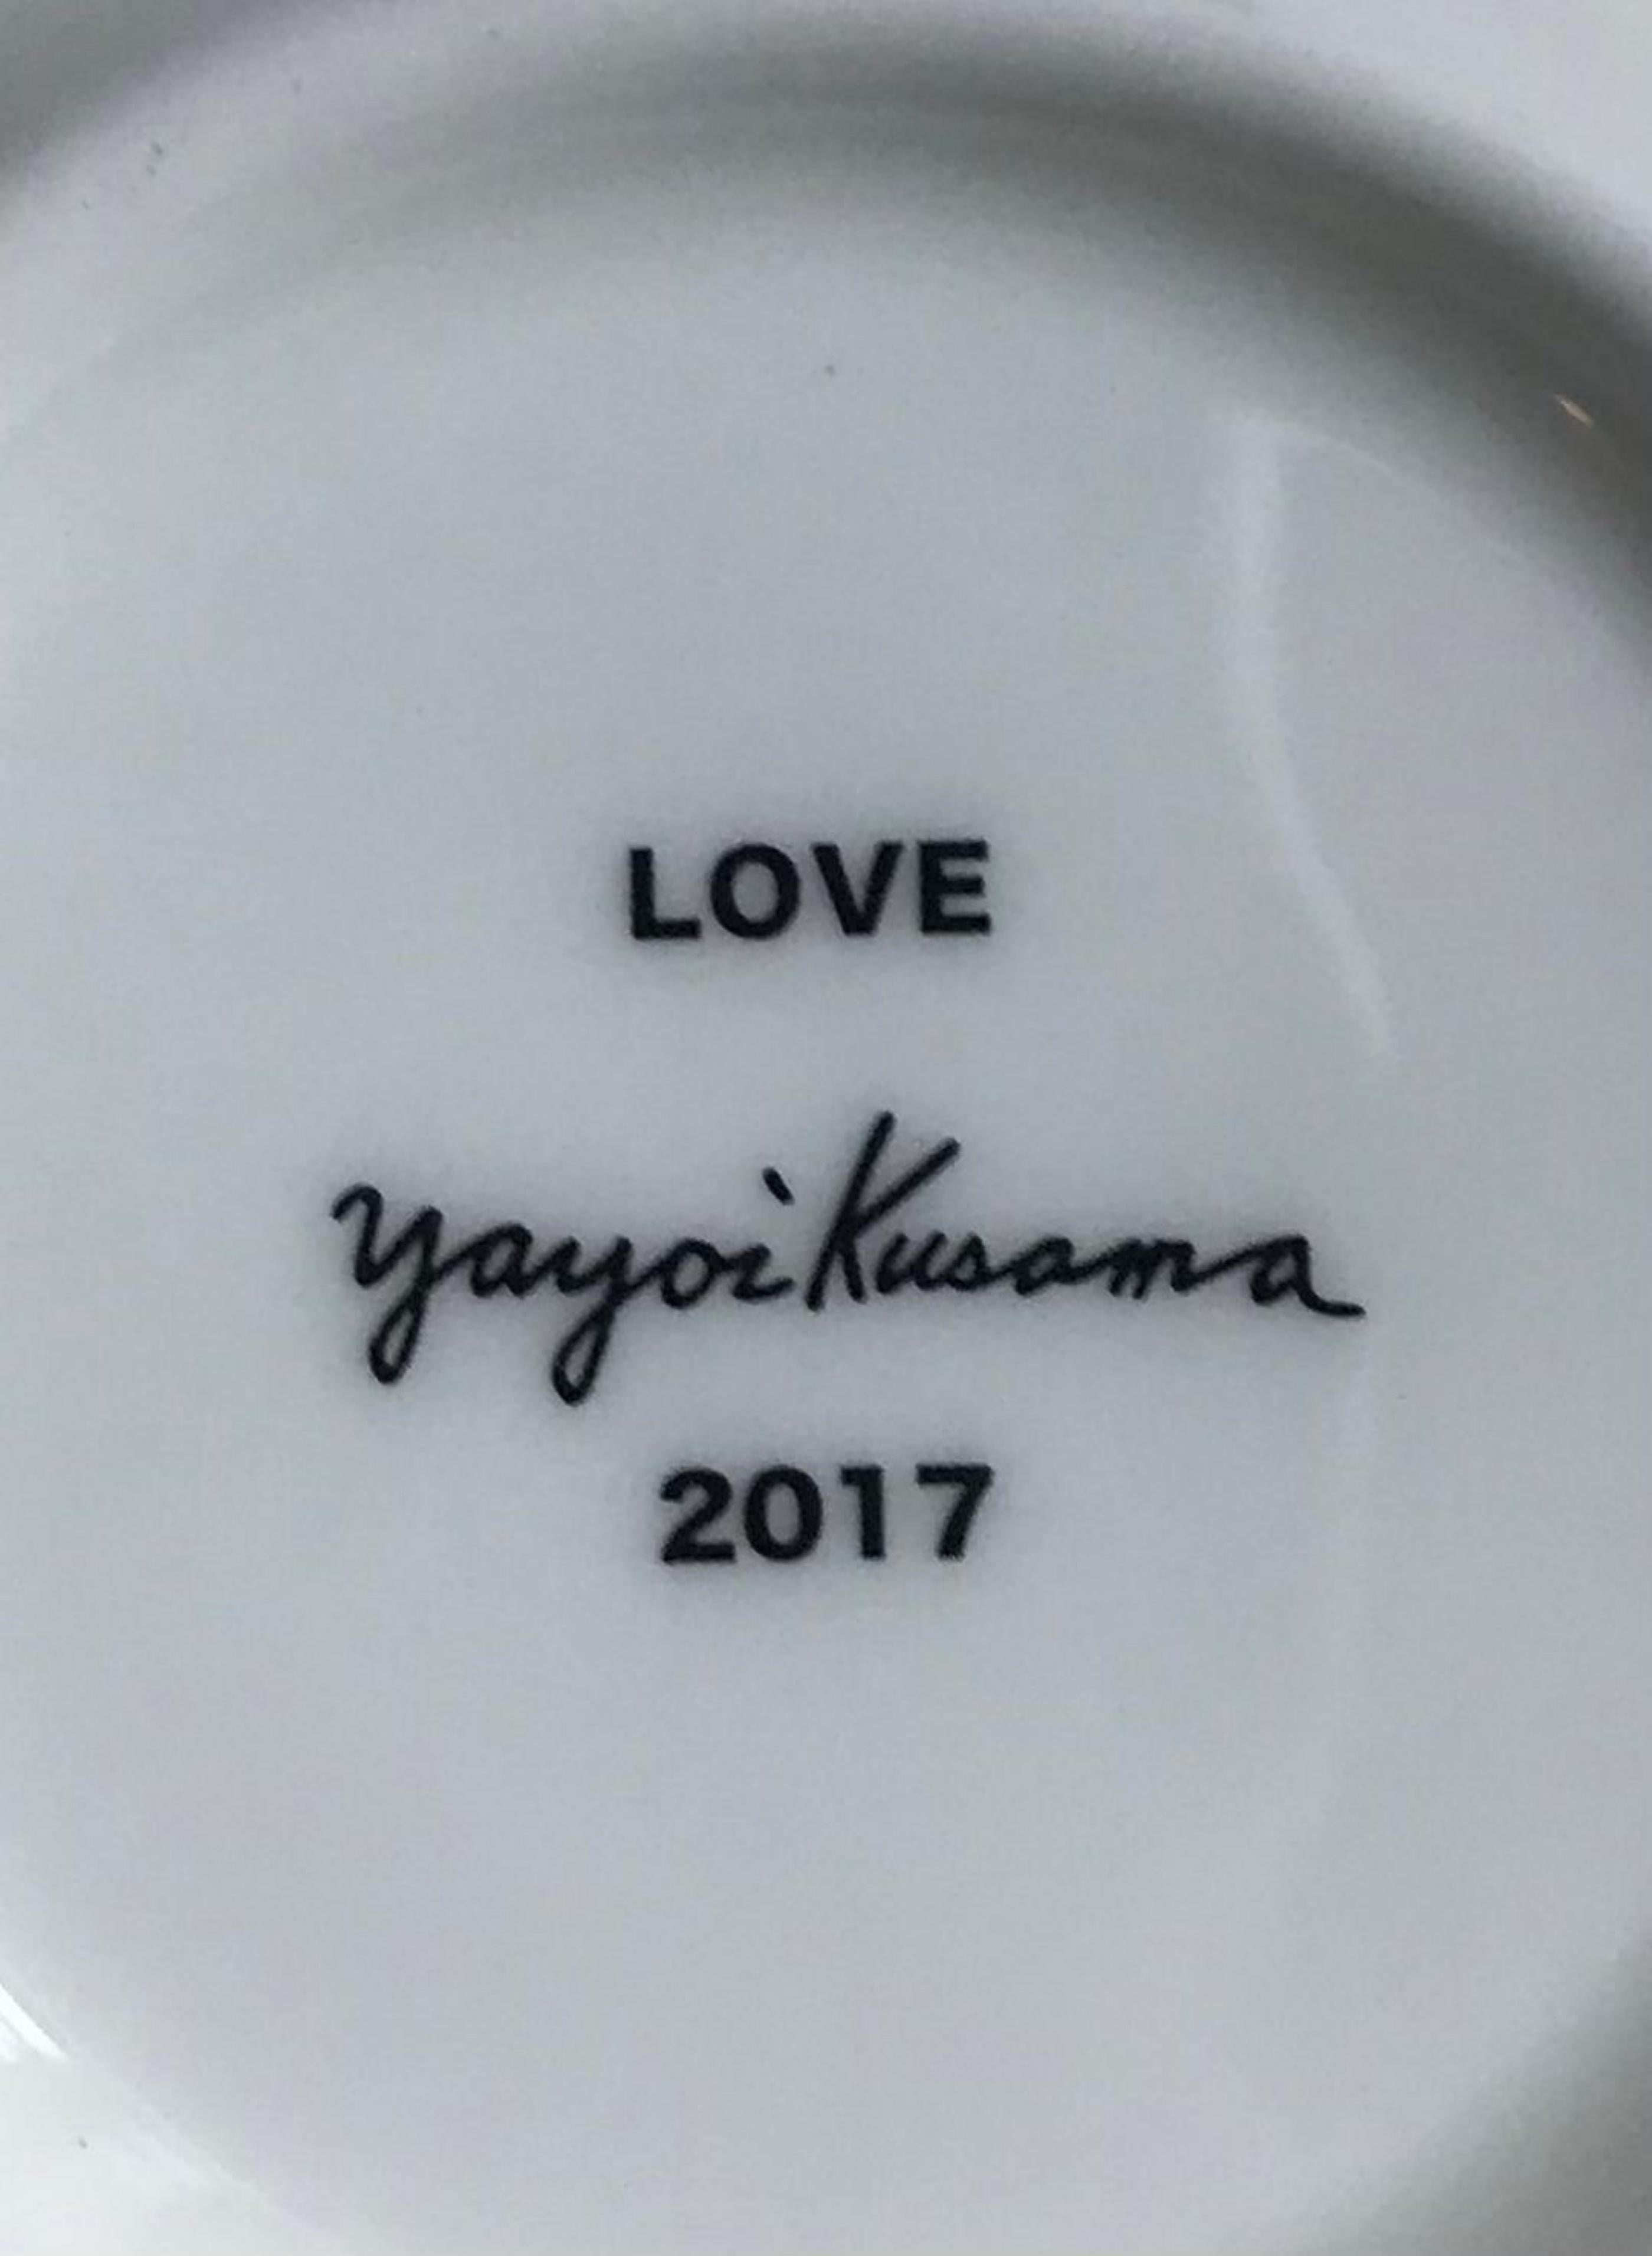 Yayoi Kusama
Love Forever Ceramic Bowl (VIP Gold Edition), 2017
Limited Edition Porcelain Bowl 
Signature, titled and date fired into bowl on the underside
4.5 x 4.5 x 1 inch
Limited edition never released to the public. Produced on the occasion of